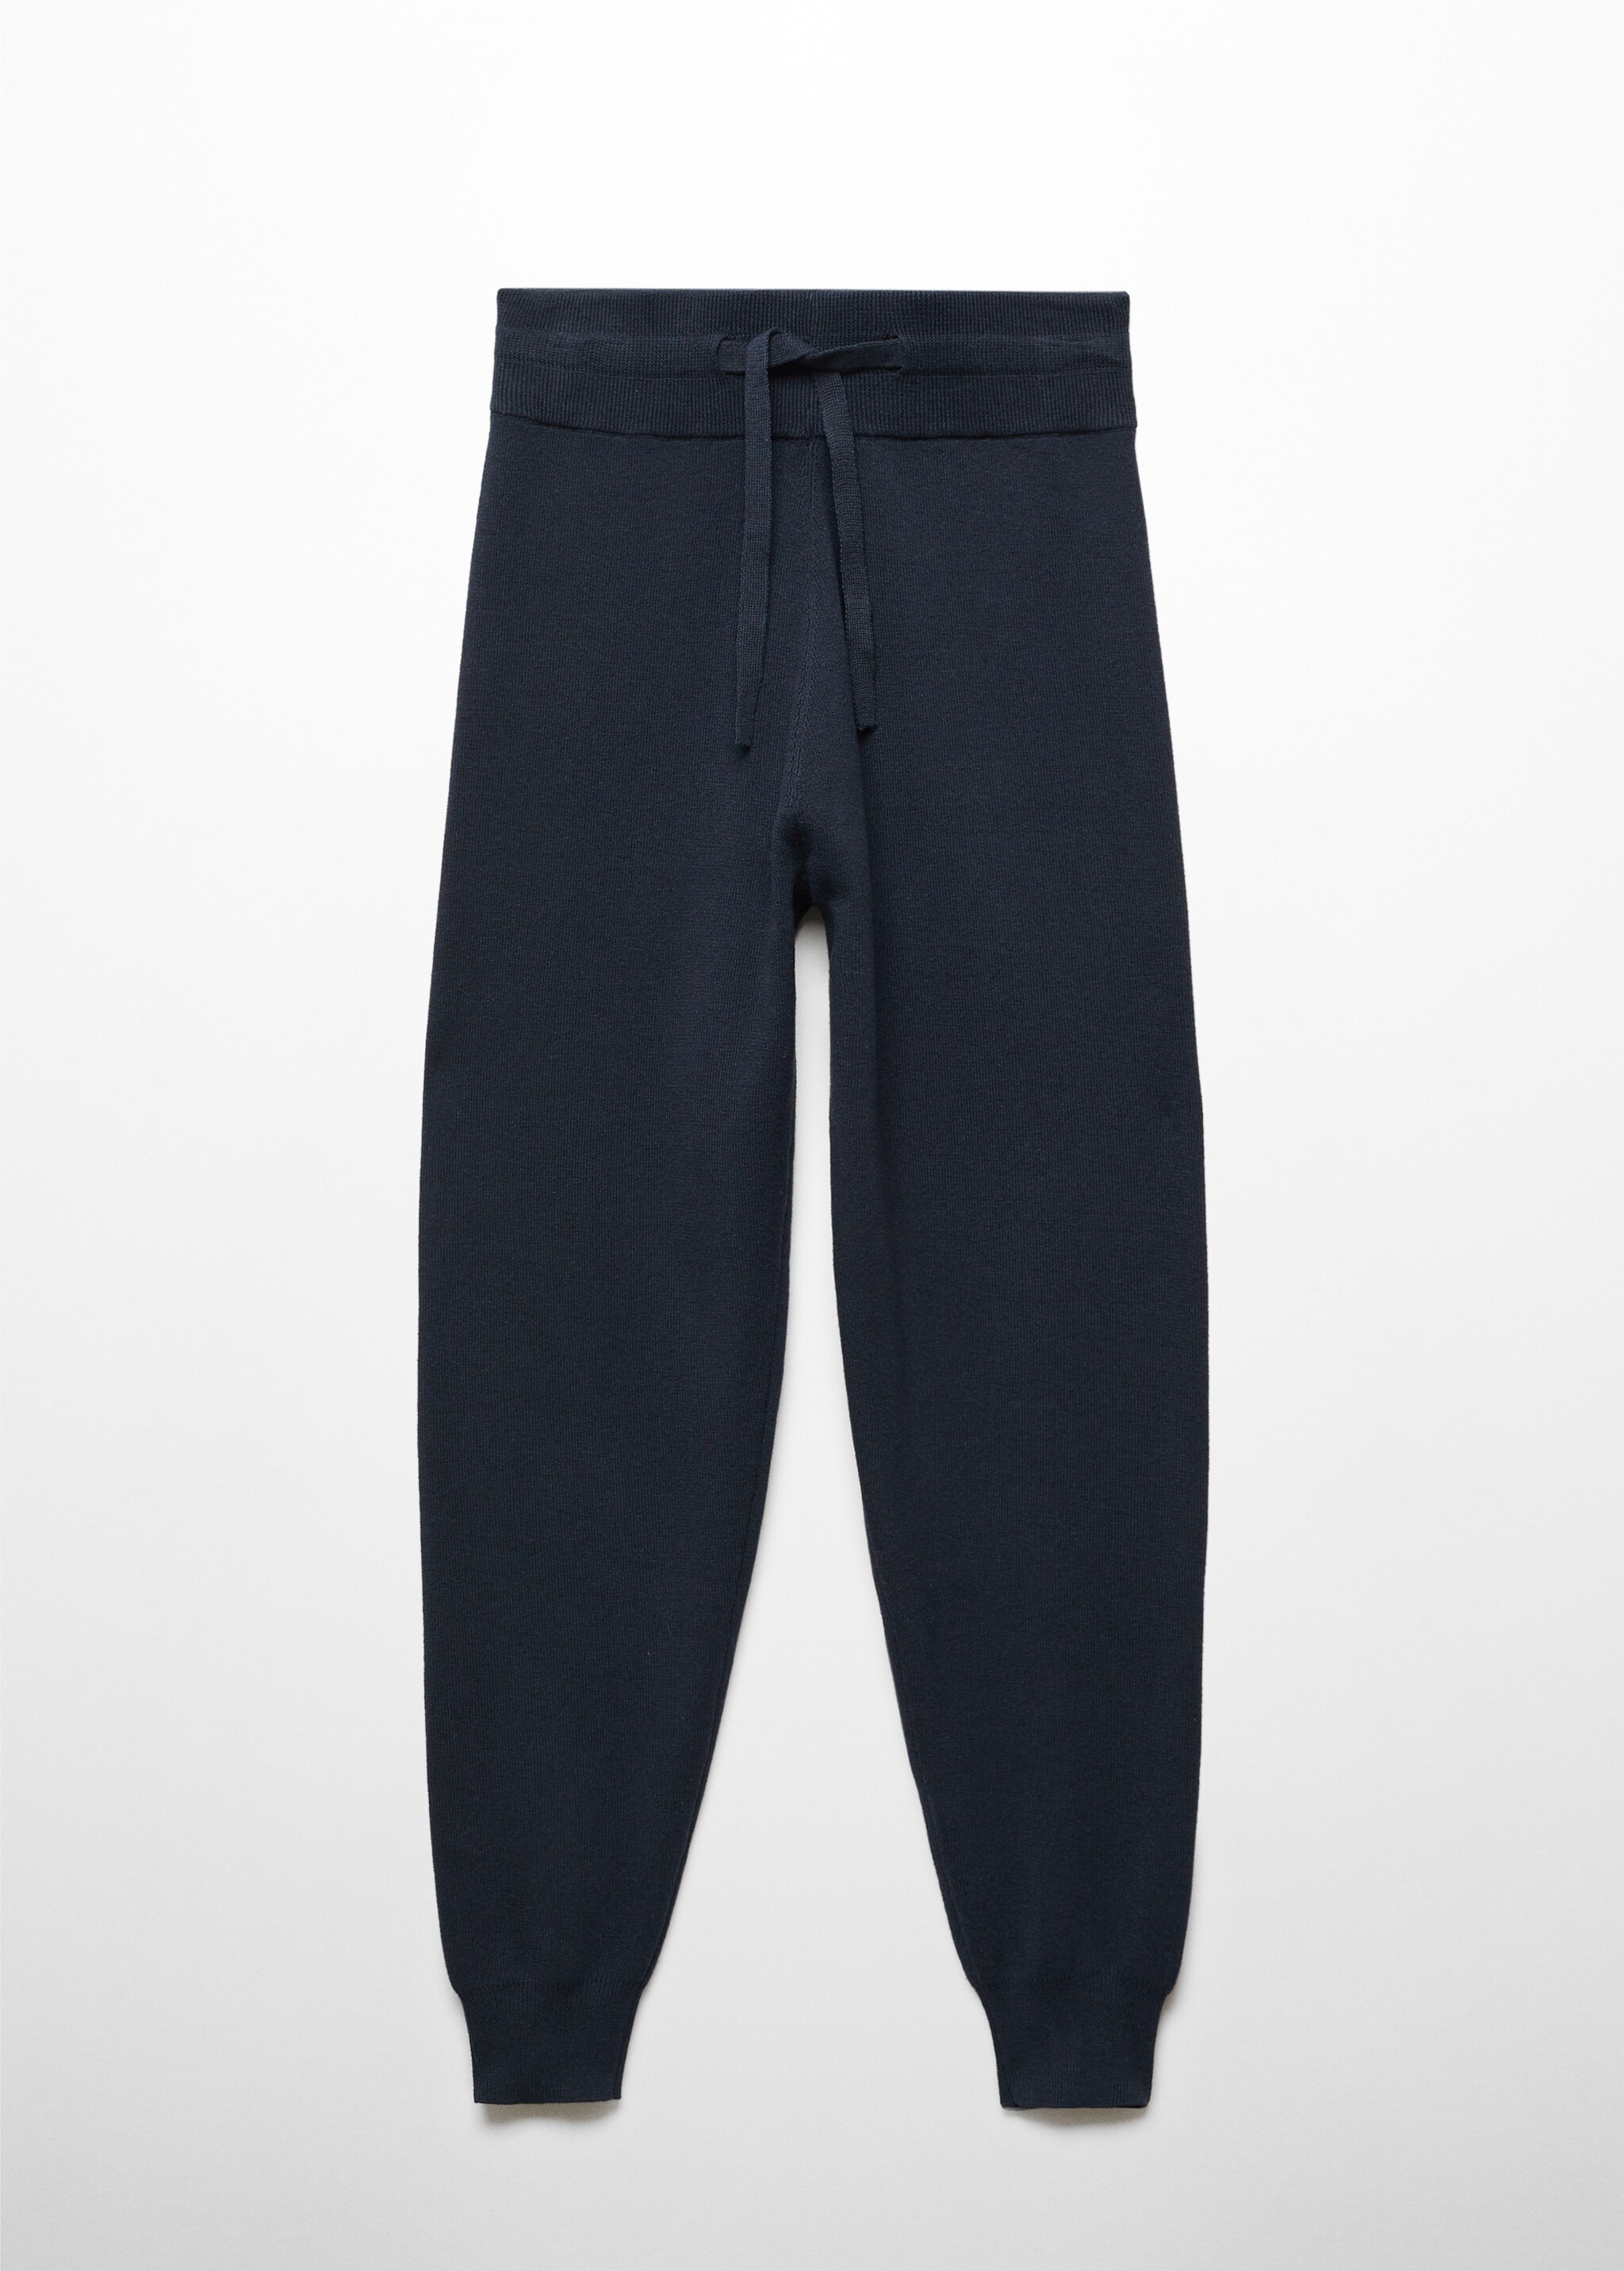 Cotton and linen jogger pyjama trousers - Article without model